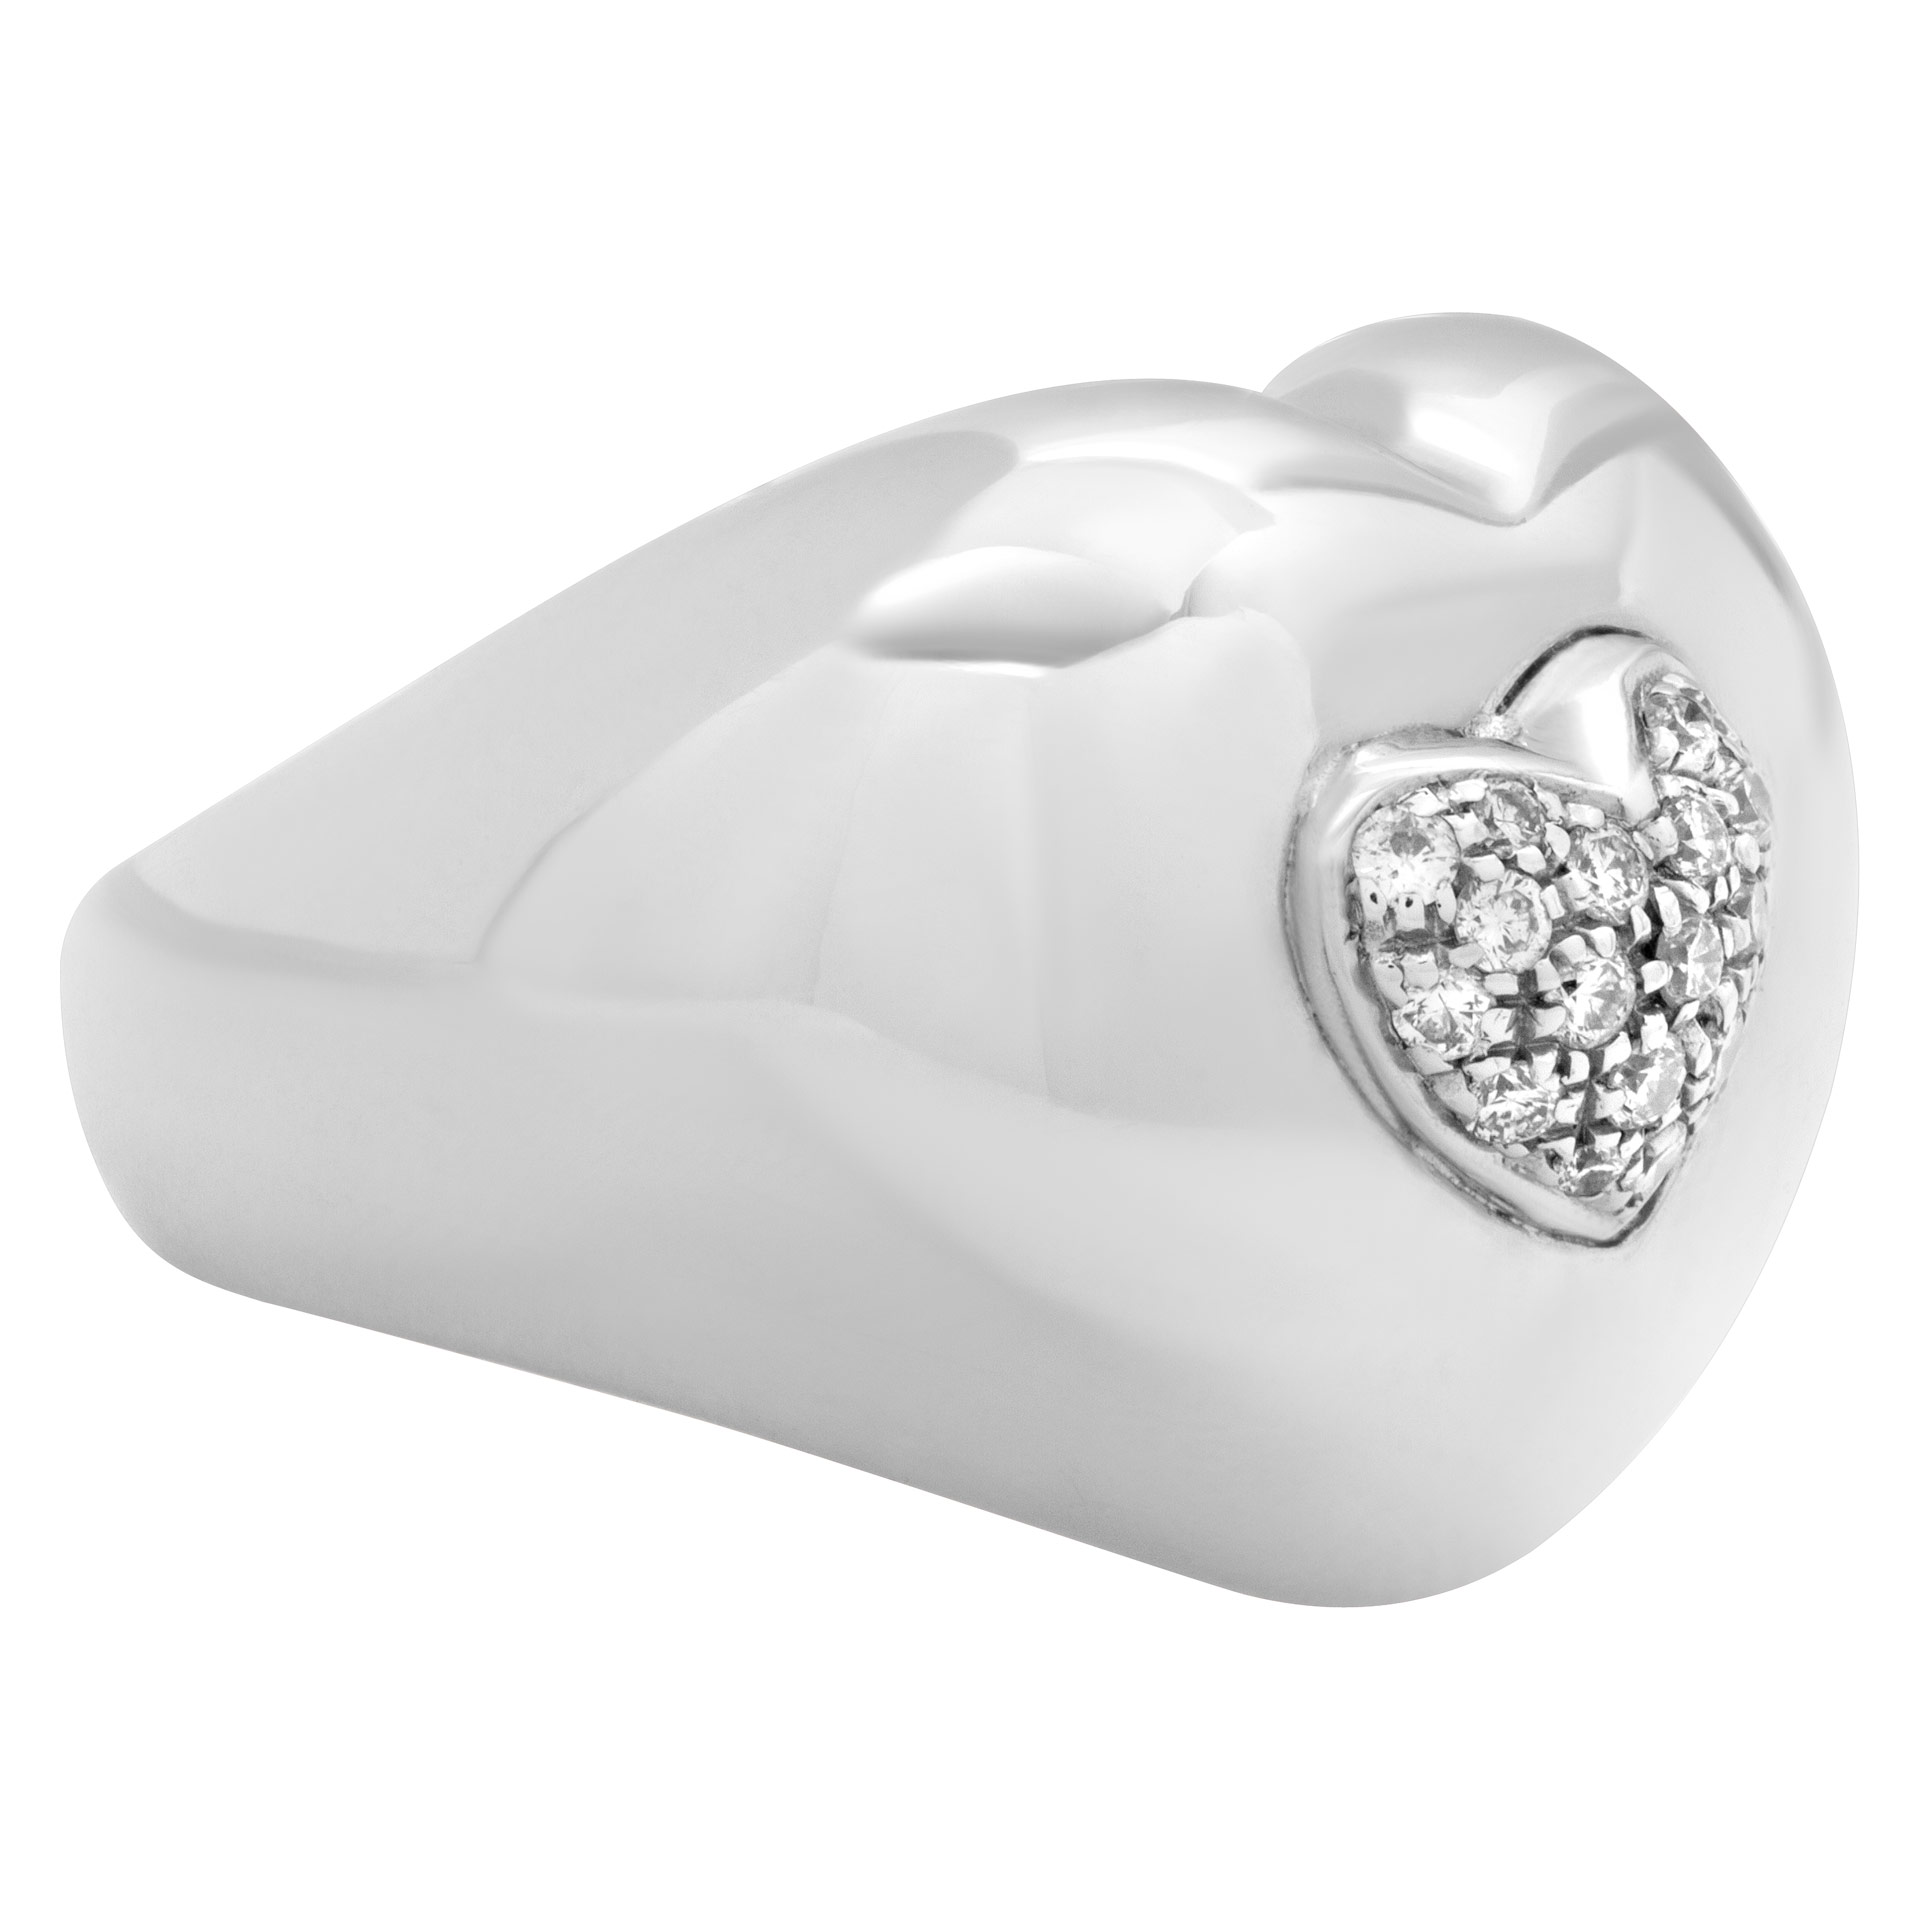 Pave diamond heart shaped ring in 18k white gold. Size 7 image 3